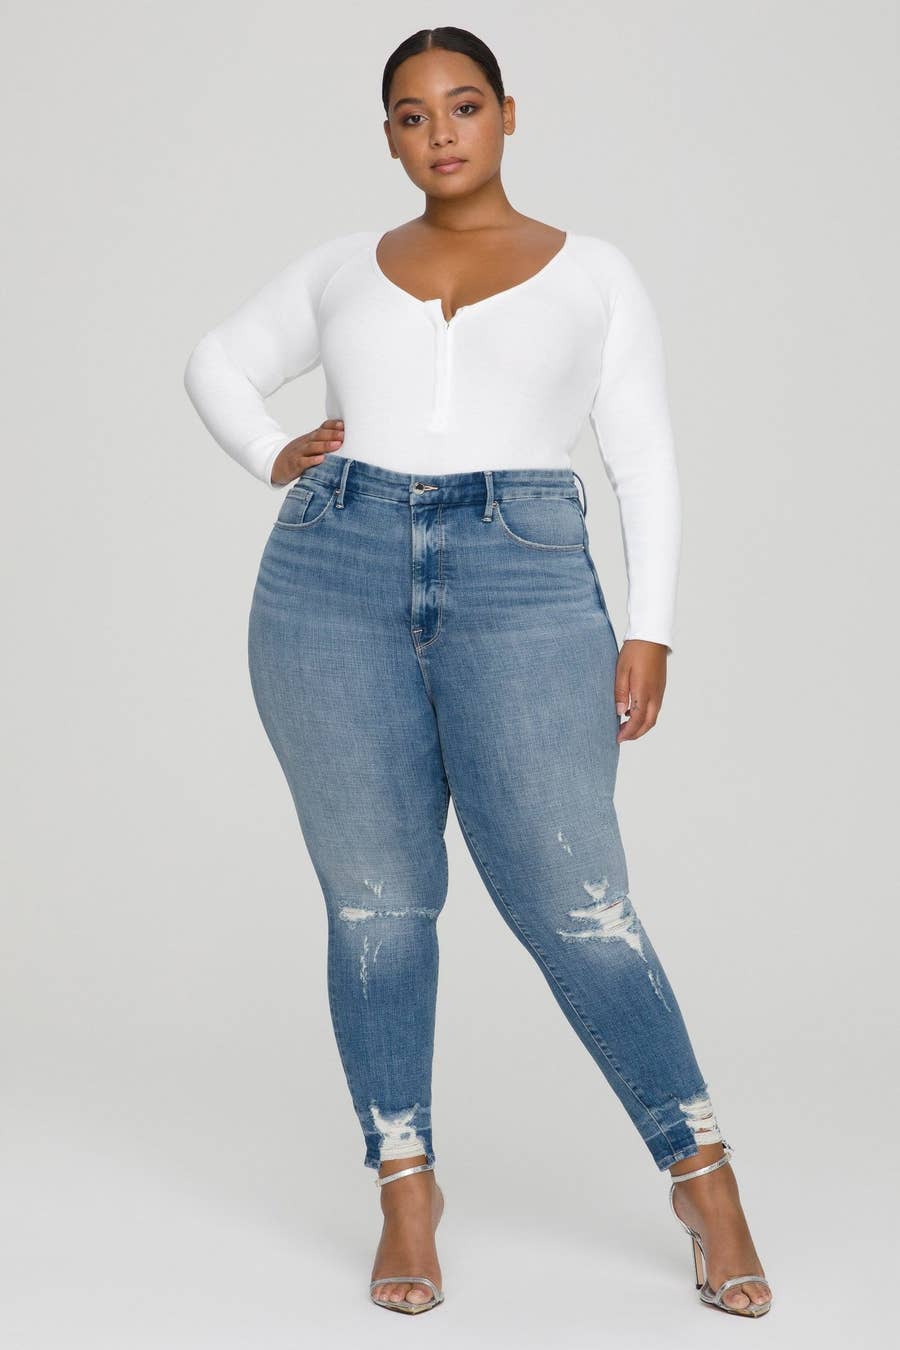 15 Best Plus Size Jeans That Are *Actually*